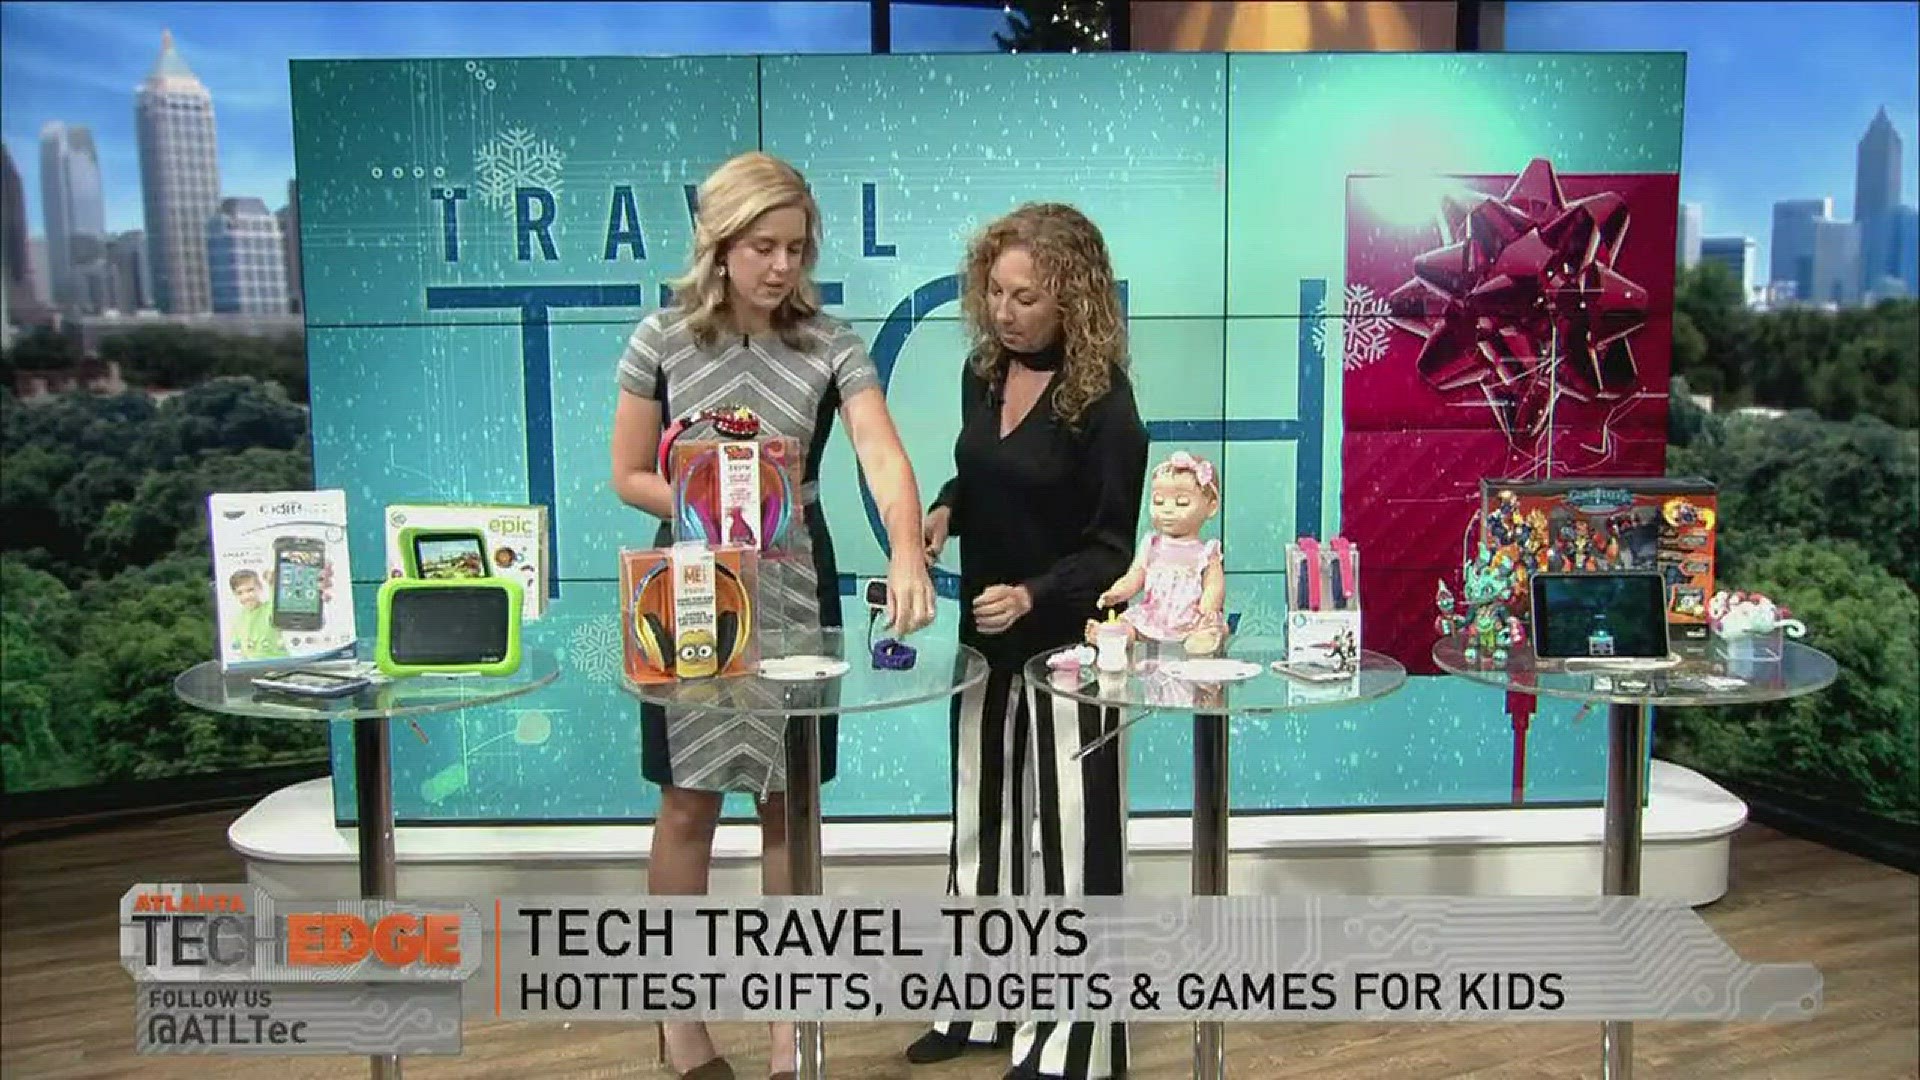 Atlanta Tech Edge 12/10/17: Tech travel toys with Laurie Schacht